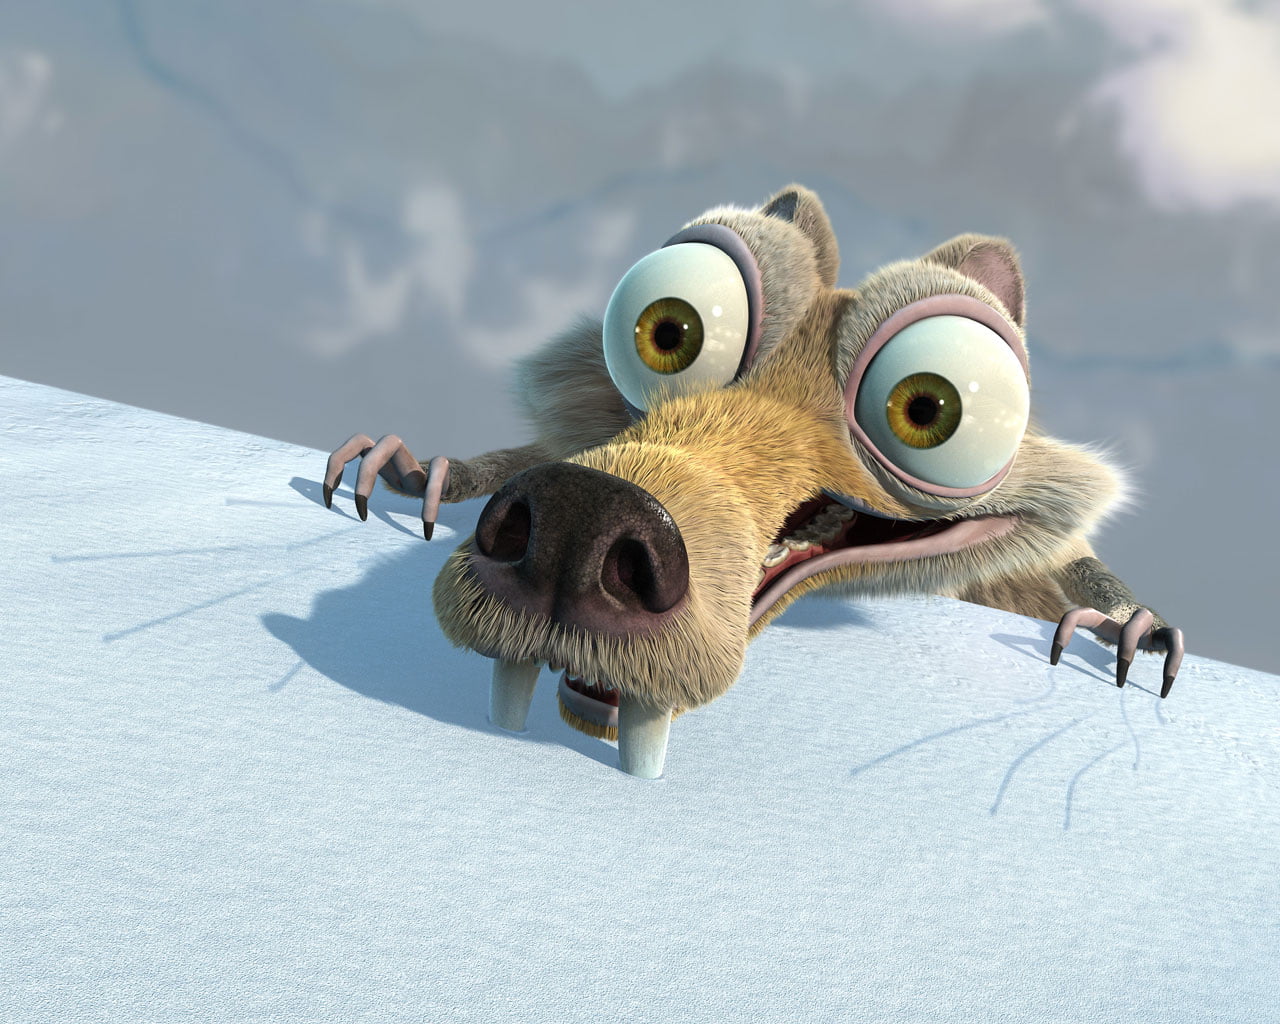 Ice Age Sid digital wallpaper, Ice Age, squirrel, Ice Age: The Meltdown, Scrat